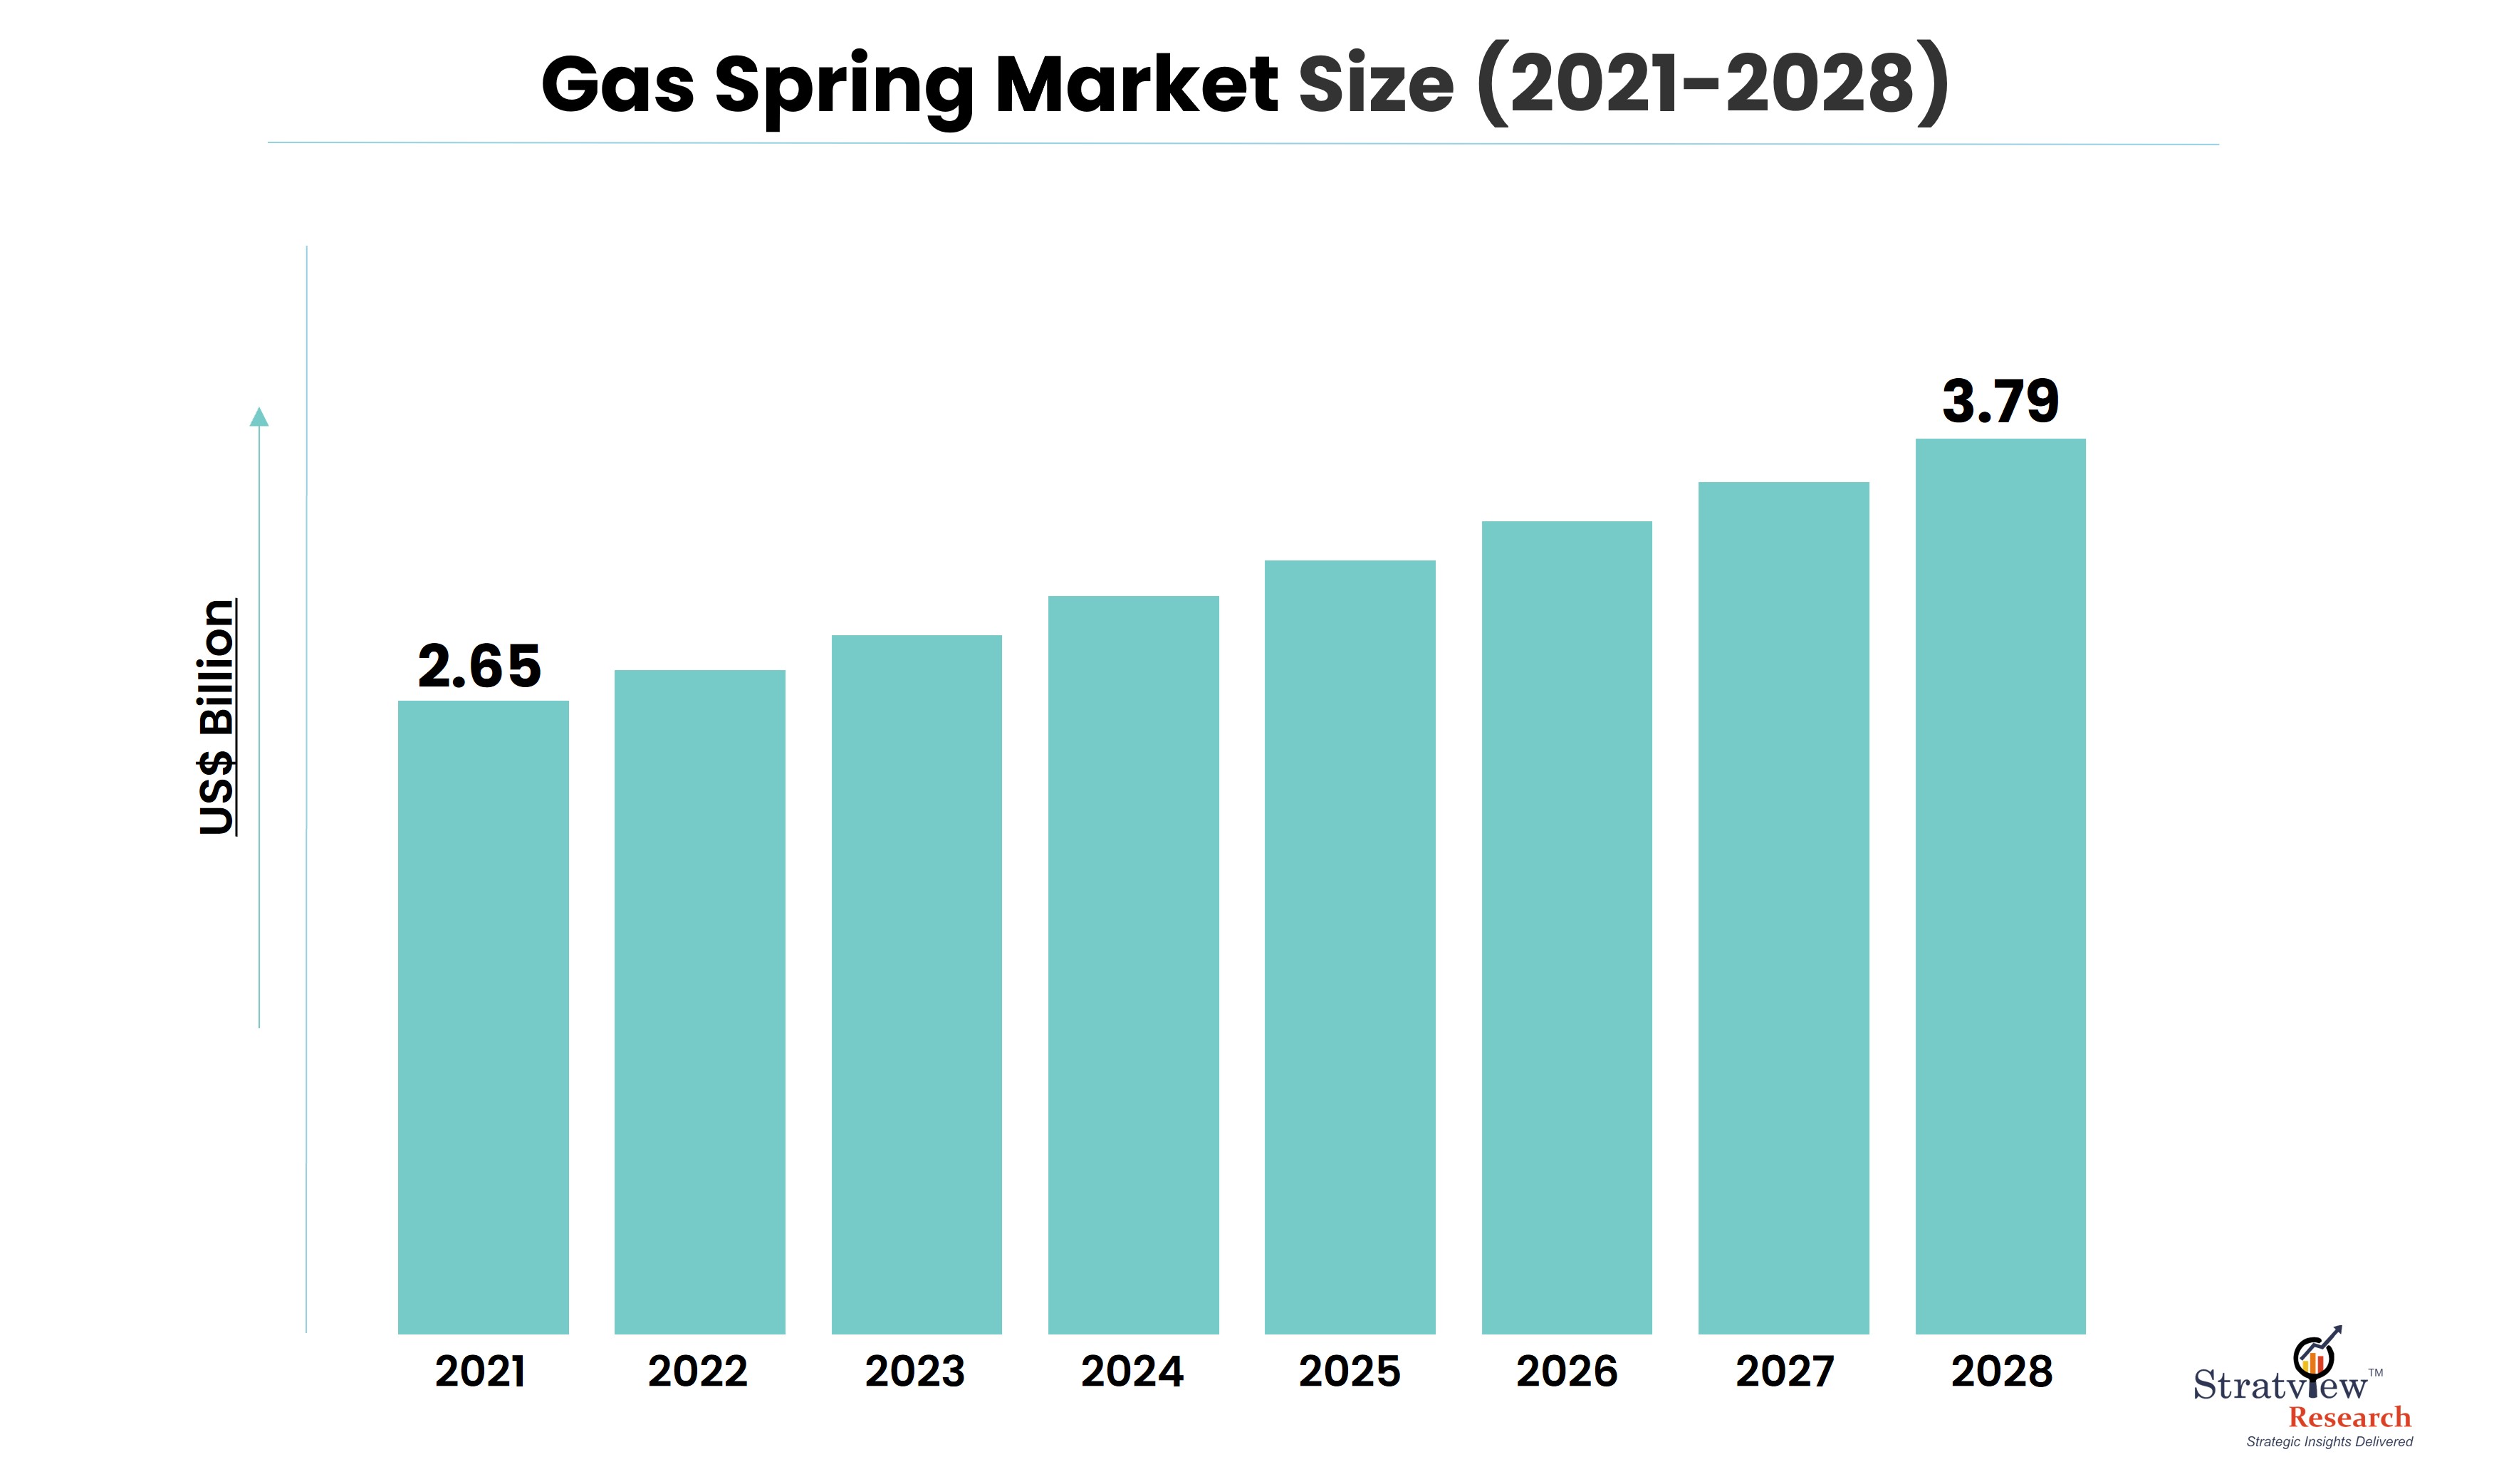 Gas Spring Market is Projected to Reach US 3.79 Billion in